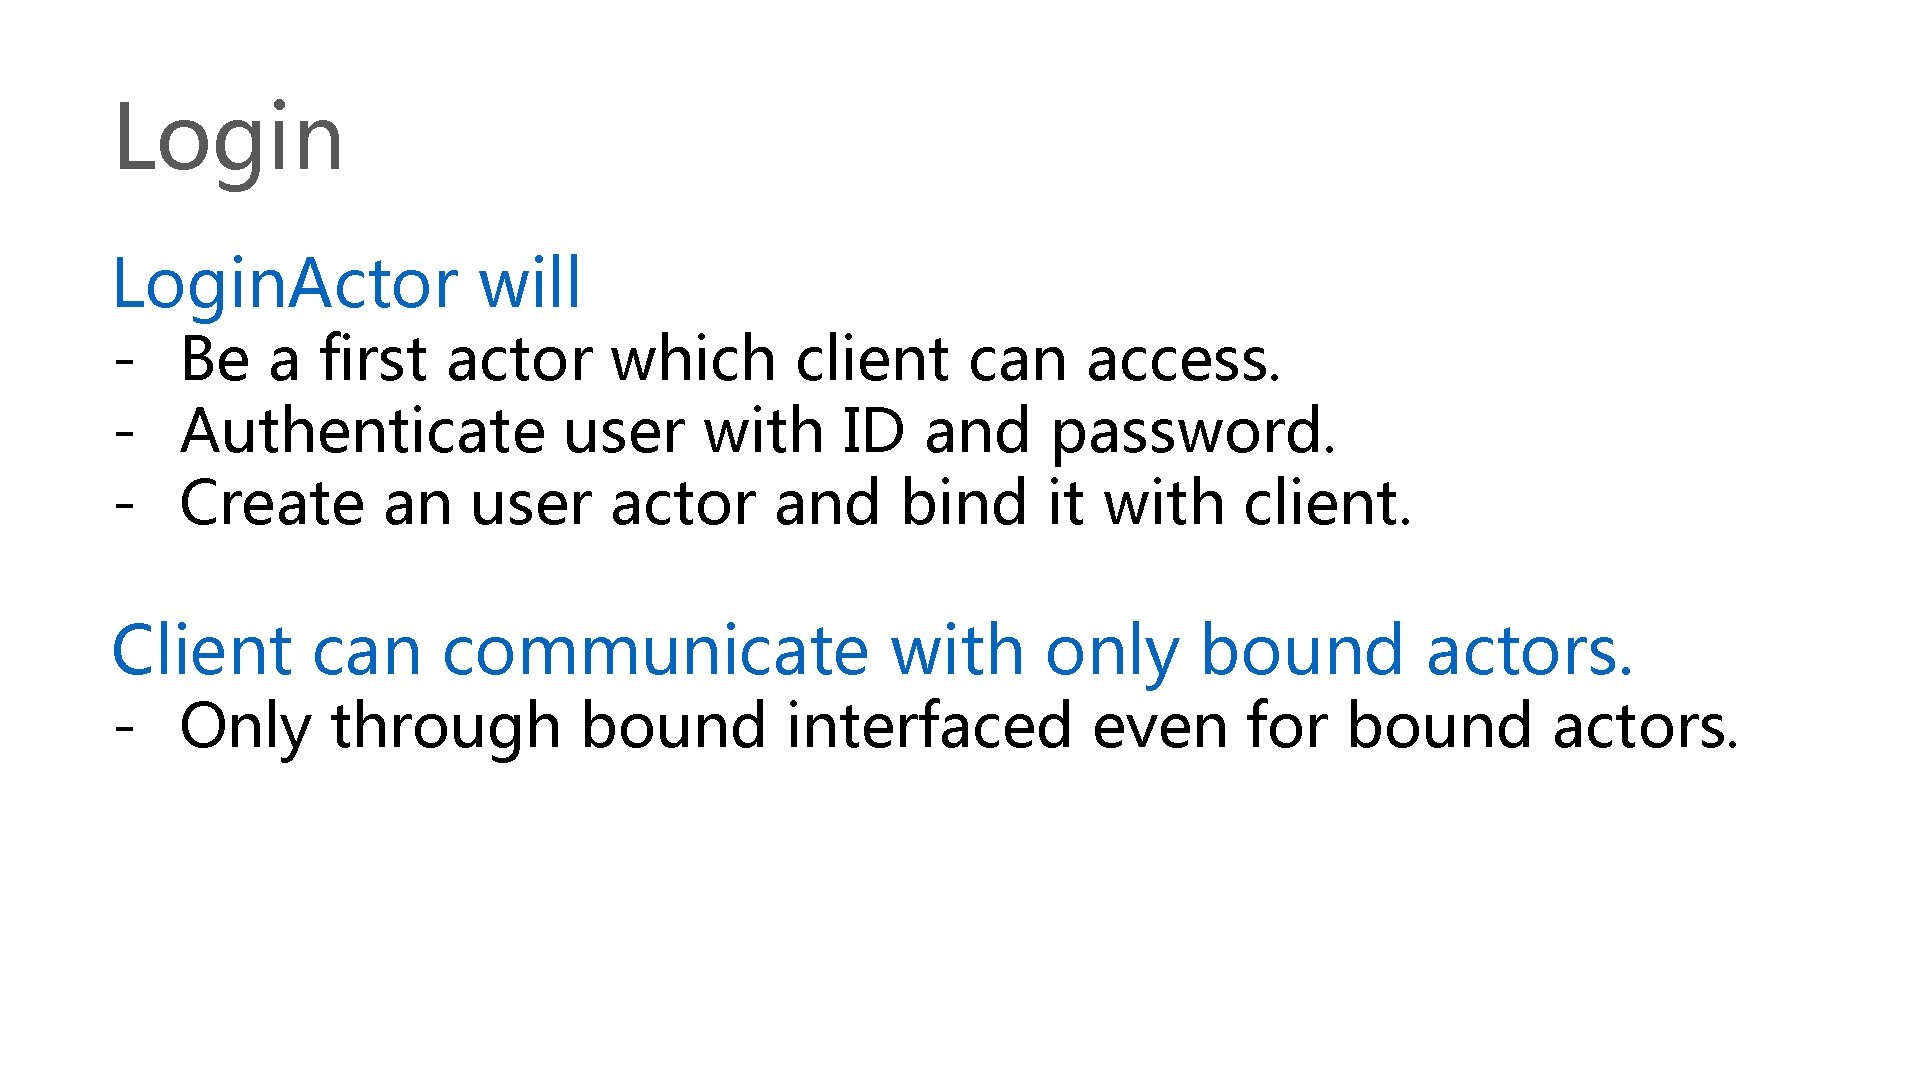 Login. Actor will - Be a first actor which client can access. - Authenticate